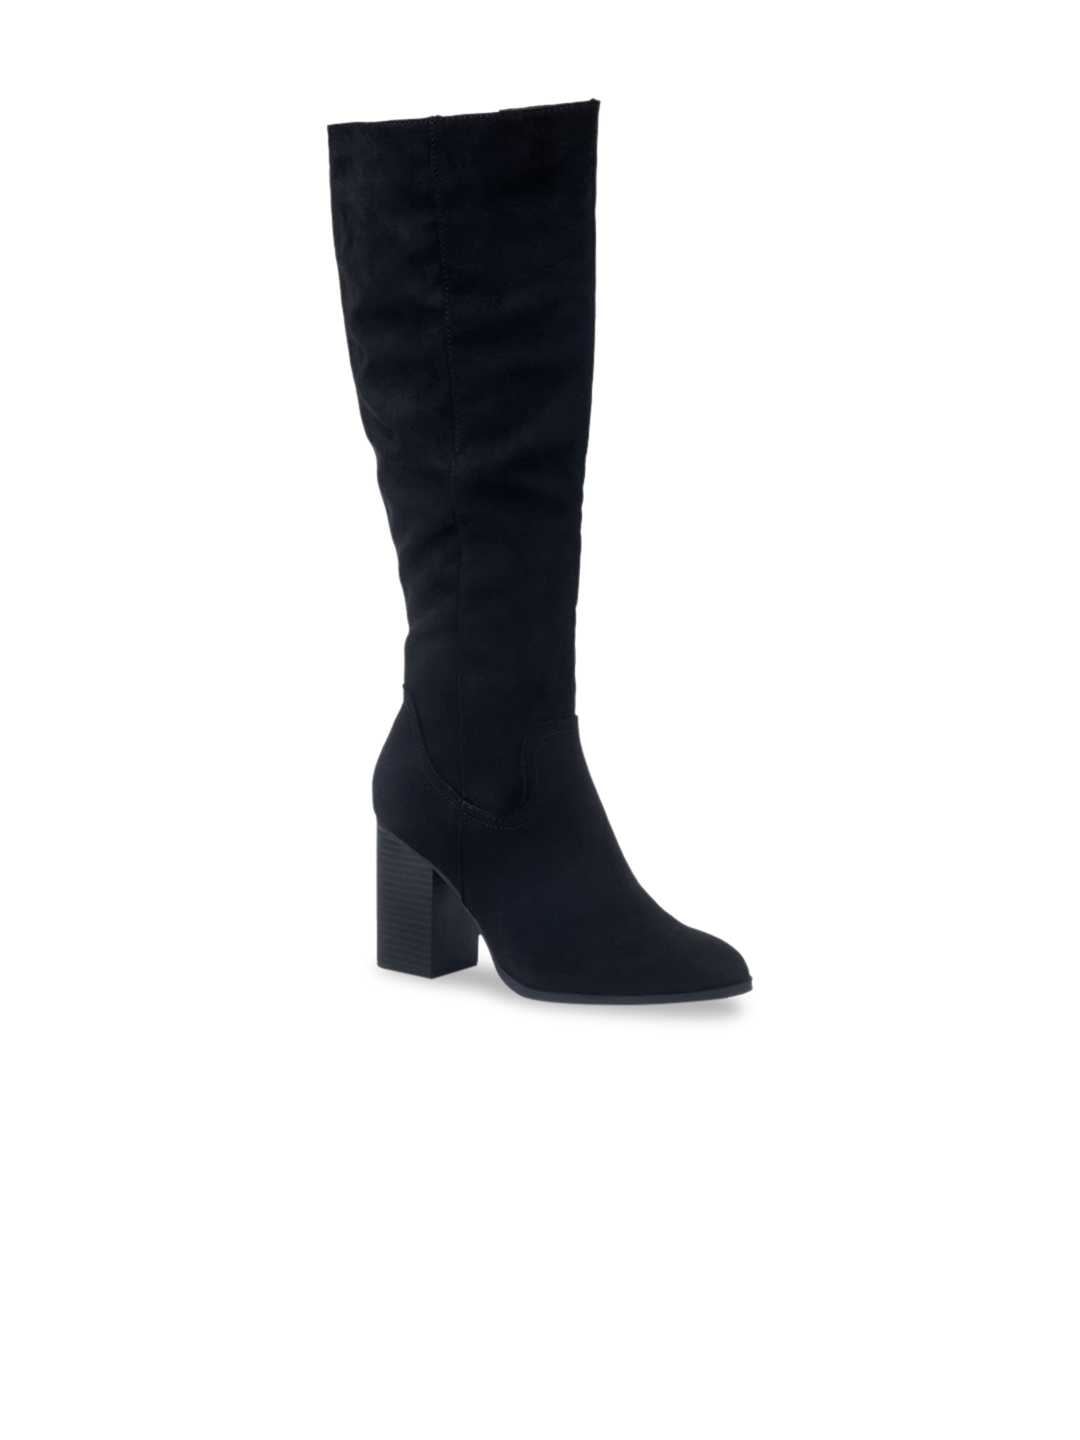 LONDON RAG Boots Best Price in India | LONDON RAG Boots Compare Price ...